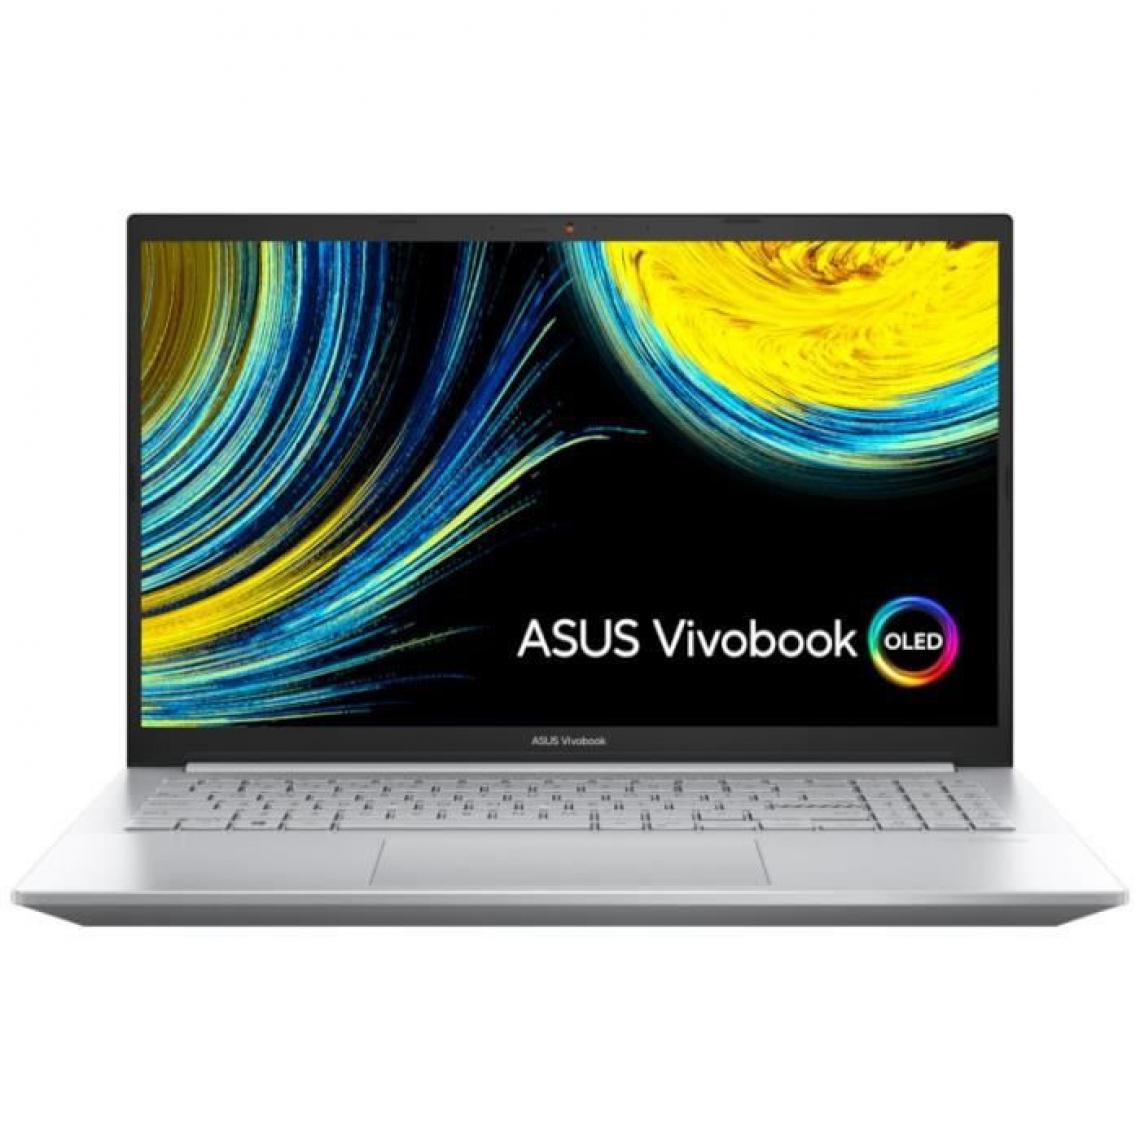 Asus - PC Ultraportable ASUS Vivobook OLED S3500QC-L1108T - 15,6 FHD OLED - Ryzen 7-5800H - RAM 16Go - SSD 512Go - RTX 3050 - W10 - AZE - PC Portable